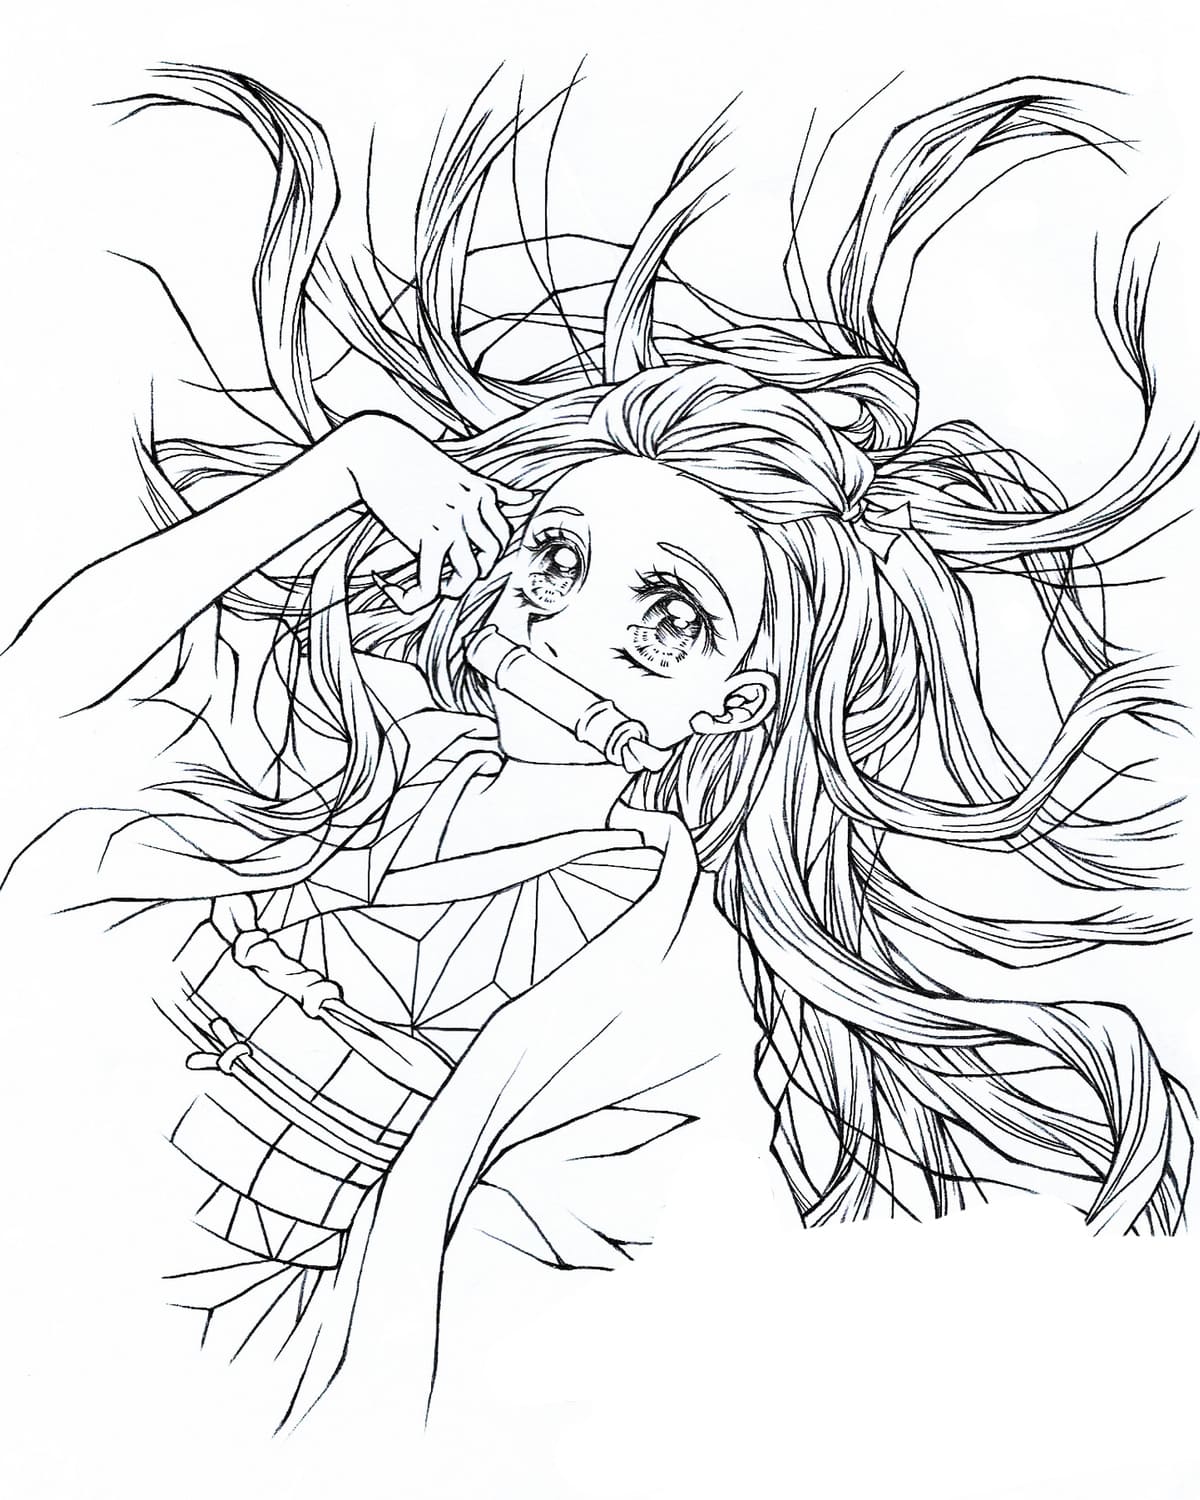 Nezuko girl with beautiful hair Coloring page Print